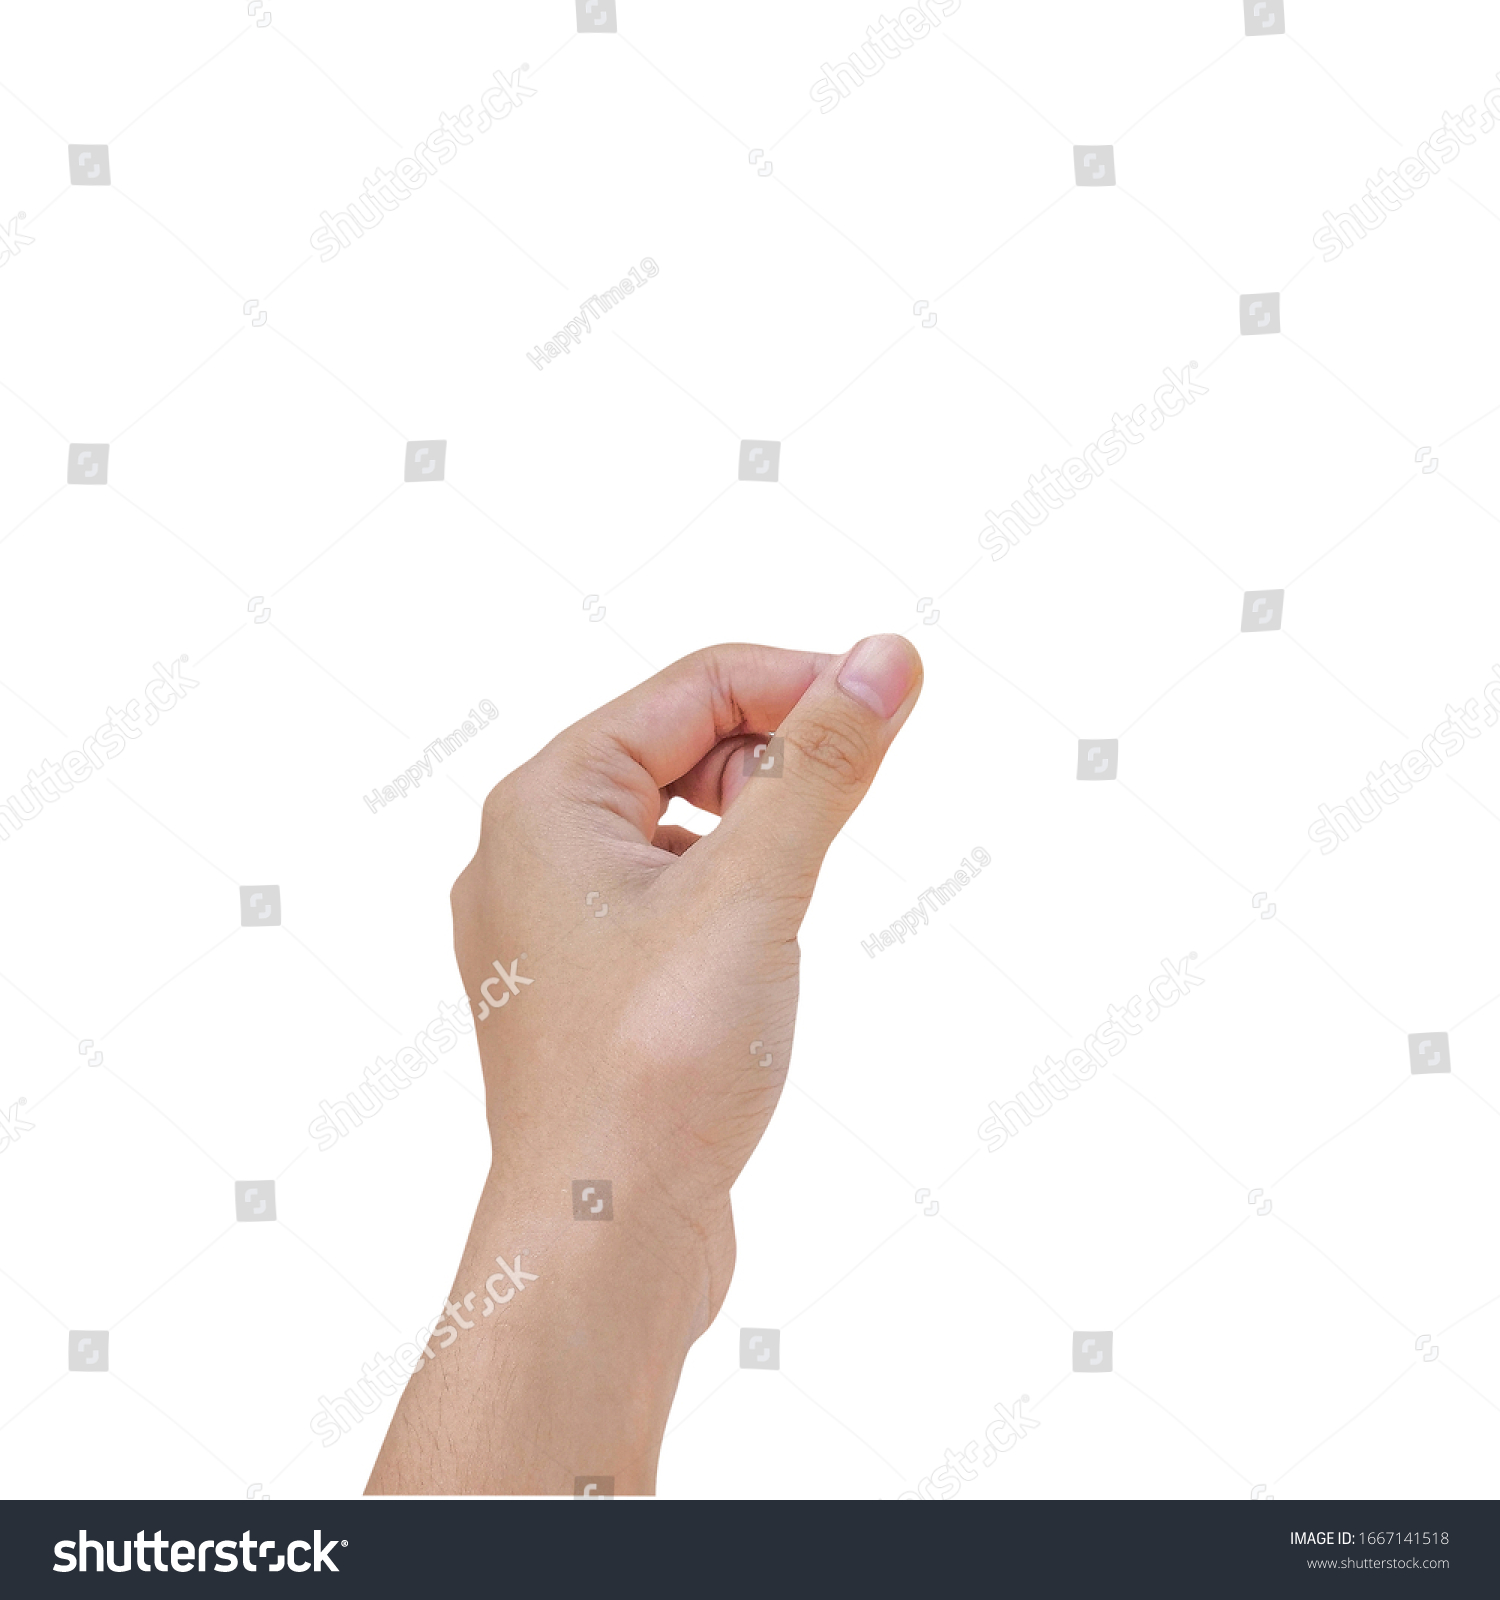 Left hand holding, isolated on white background with clipping path. #1667141518